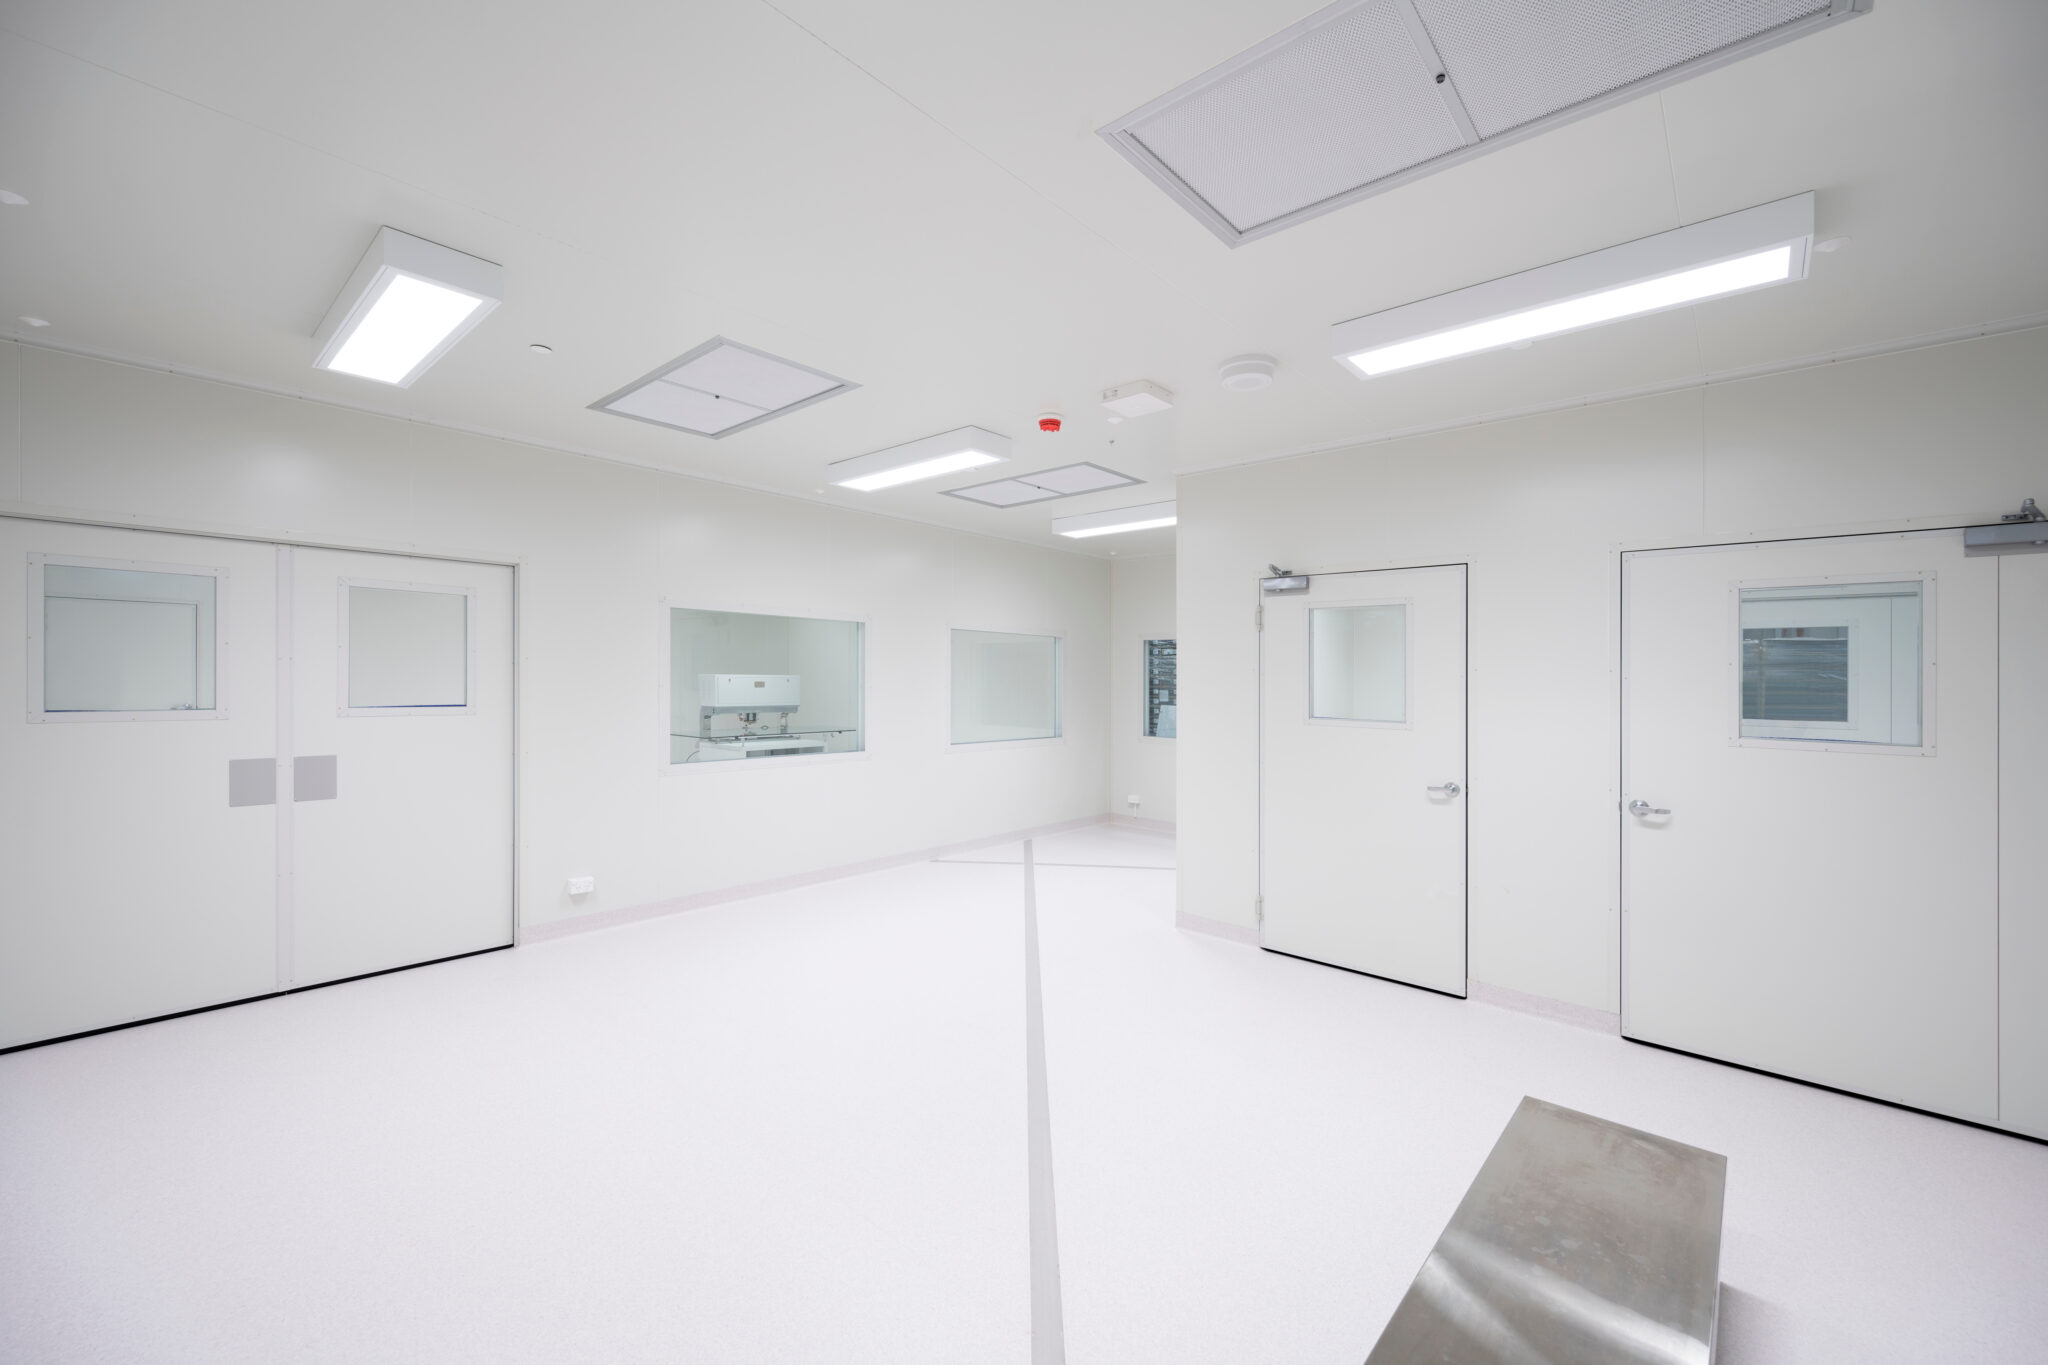 Cleanroom project for Samsung Company by Heighton